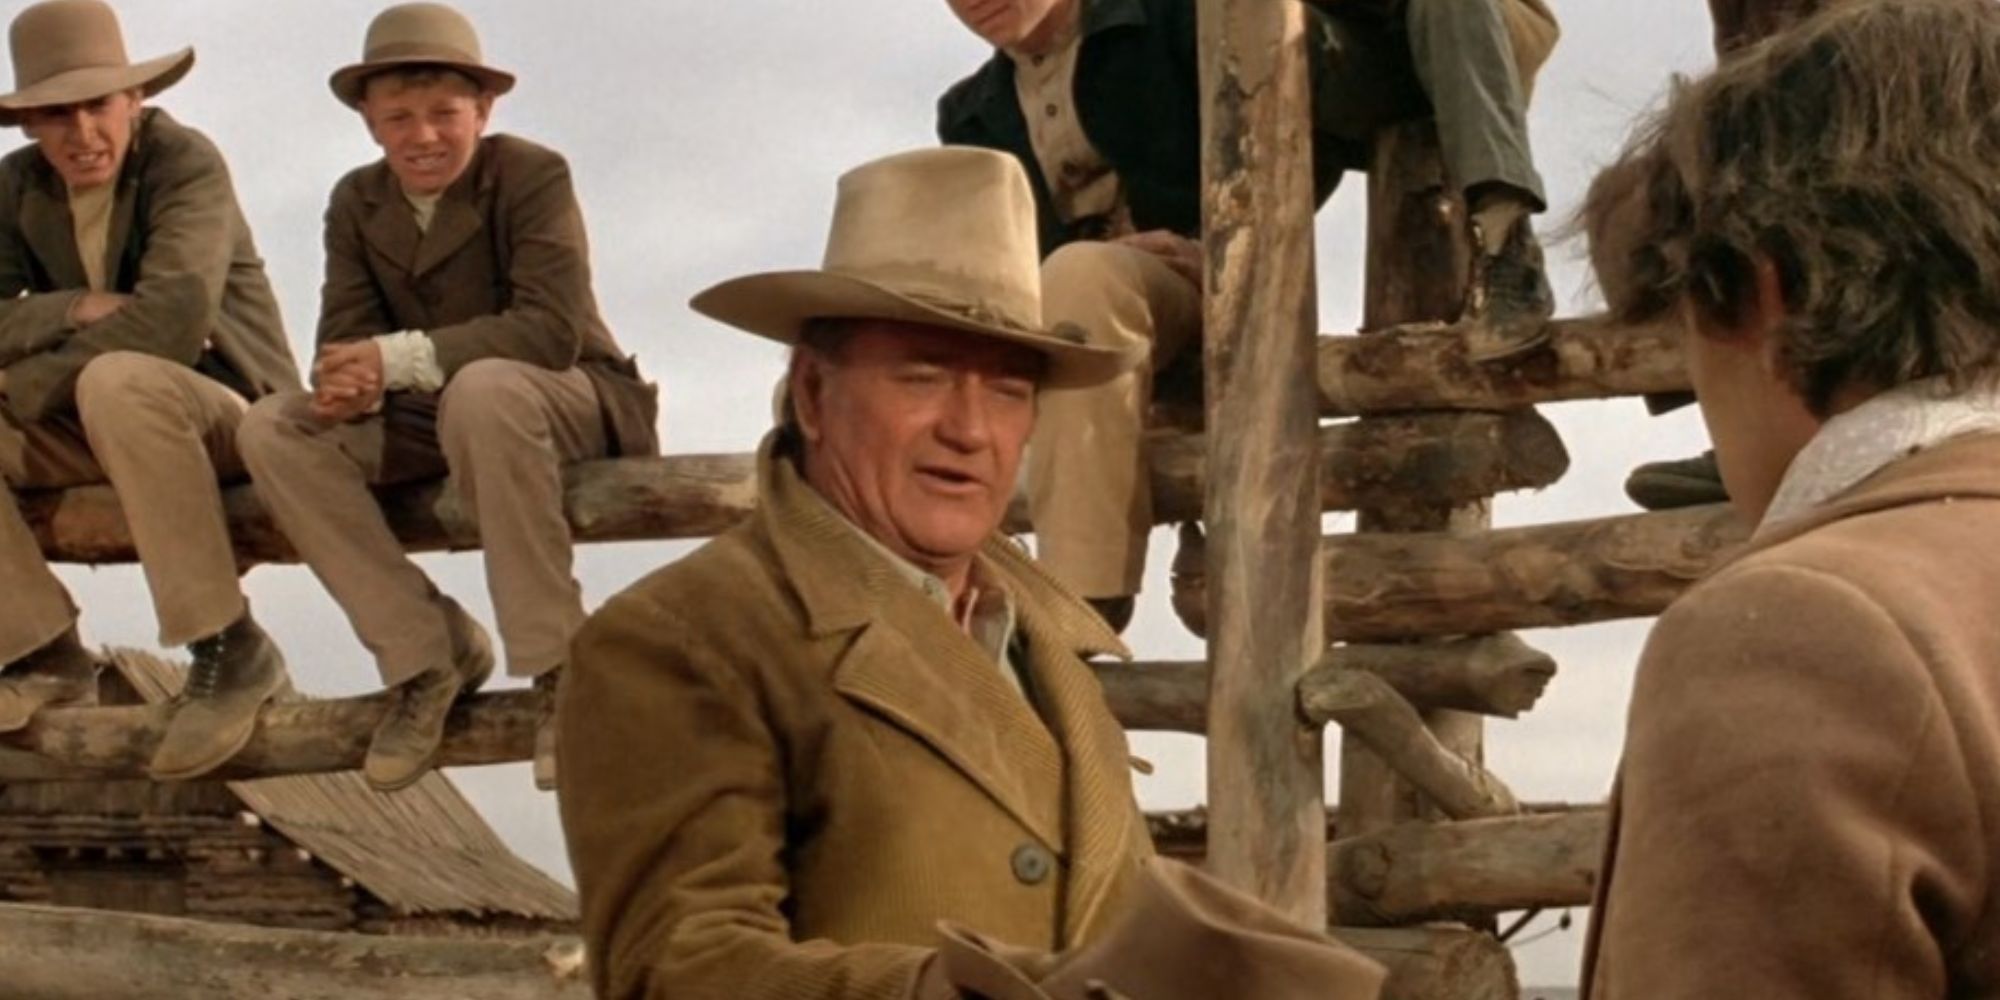 Boys sitting on a wooden fence behind John Wayne who is speaking to a boy in The Cowboys